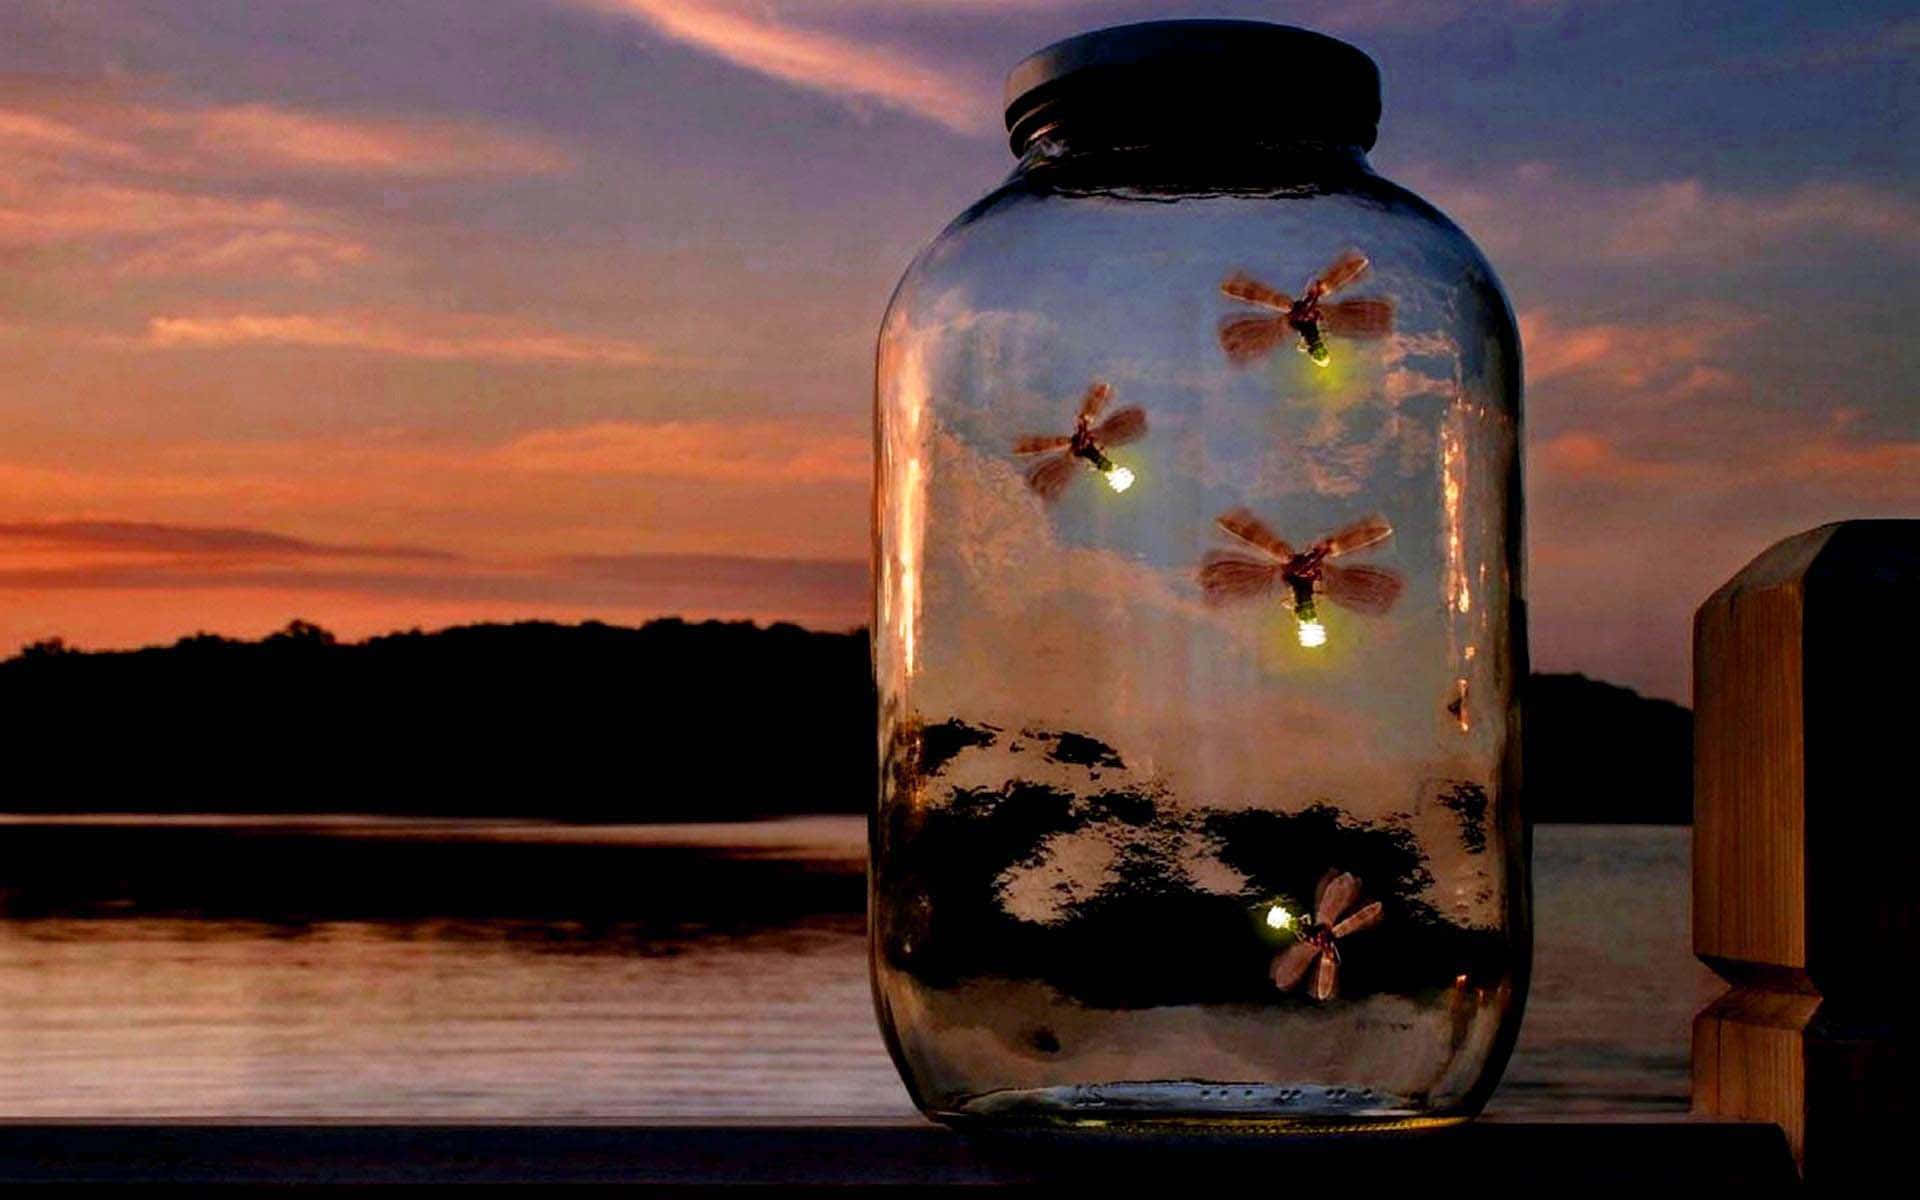 Captivating view of an illuminating firefly against the night sky